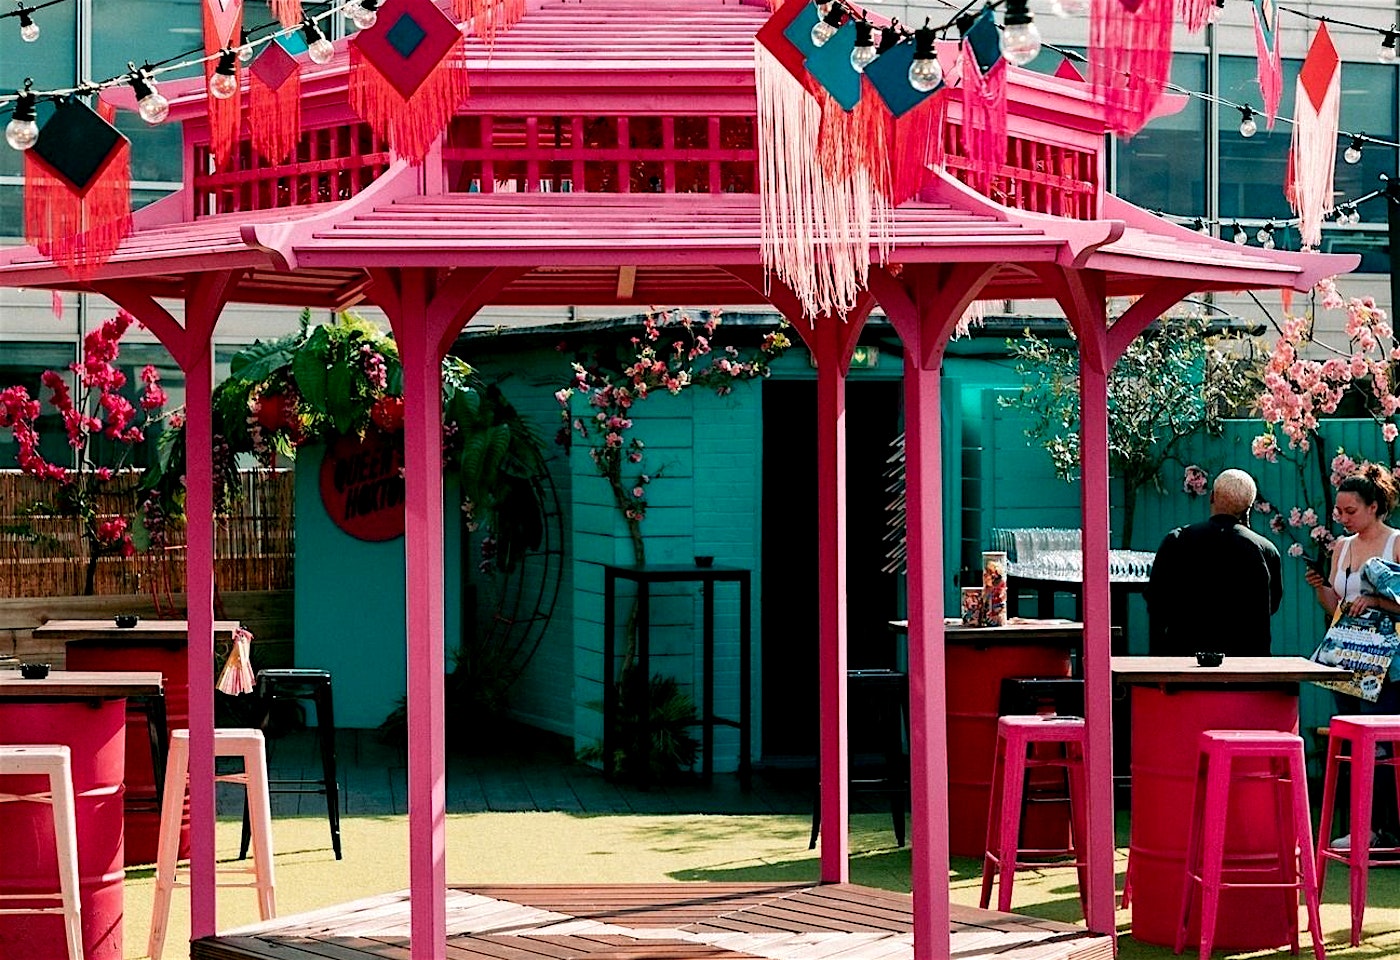 The pink pagoda at Queen of Hoxton's roof terrace